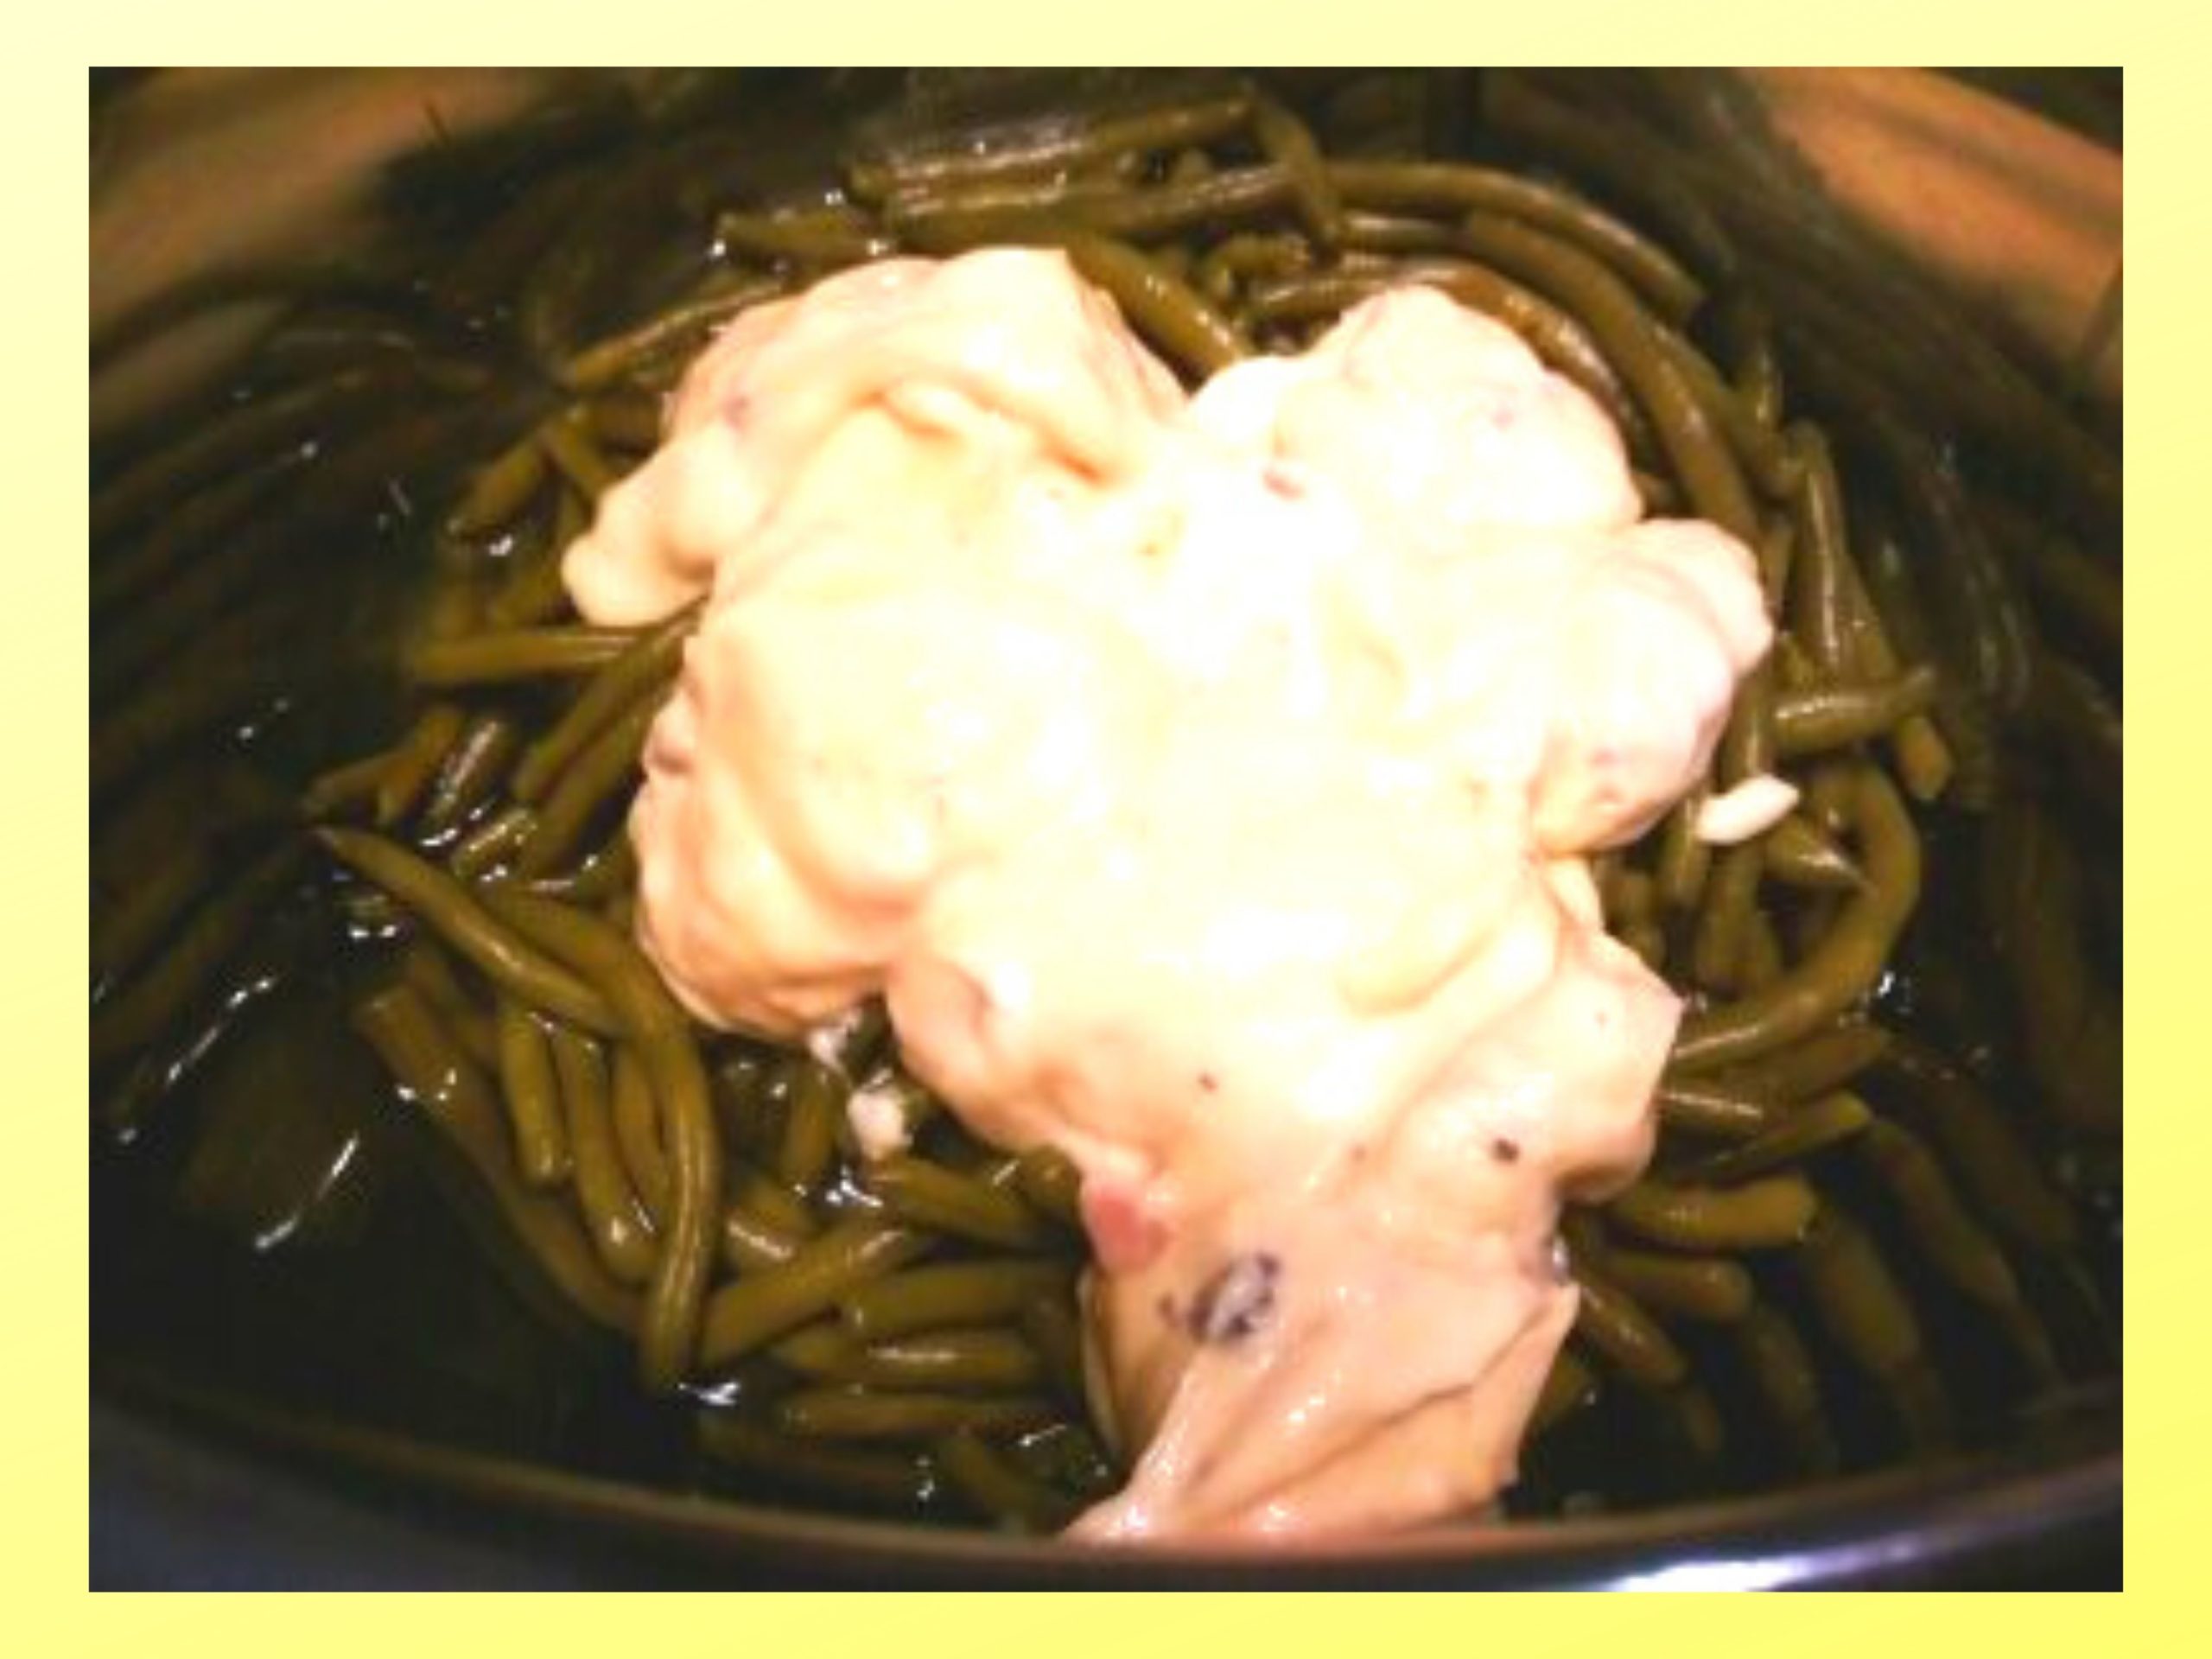 The inside of an Instant Pot filled with whole green beans, chicken broth, and cream of mushroom with cream of chicken.